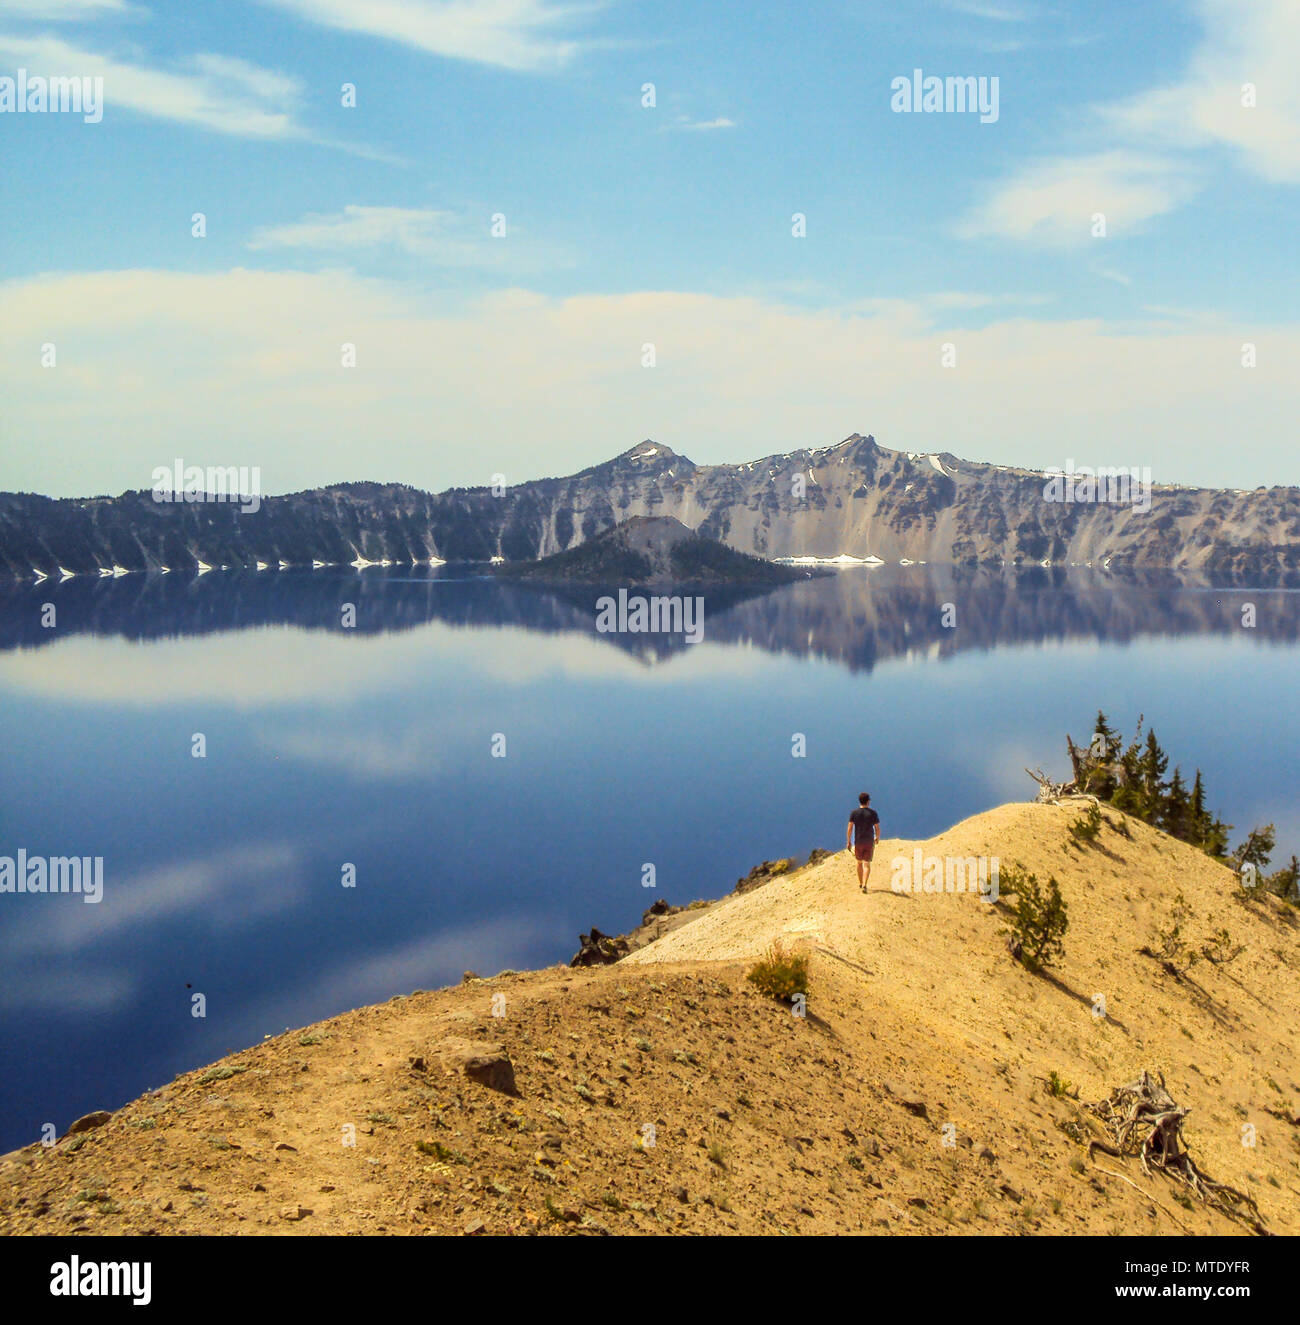 Man walking along the crest of a mountain towards the water of Crater Lake, Oregon Stock Photo